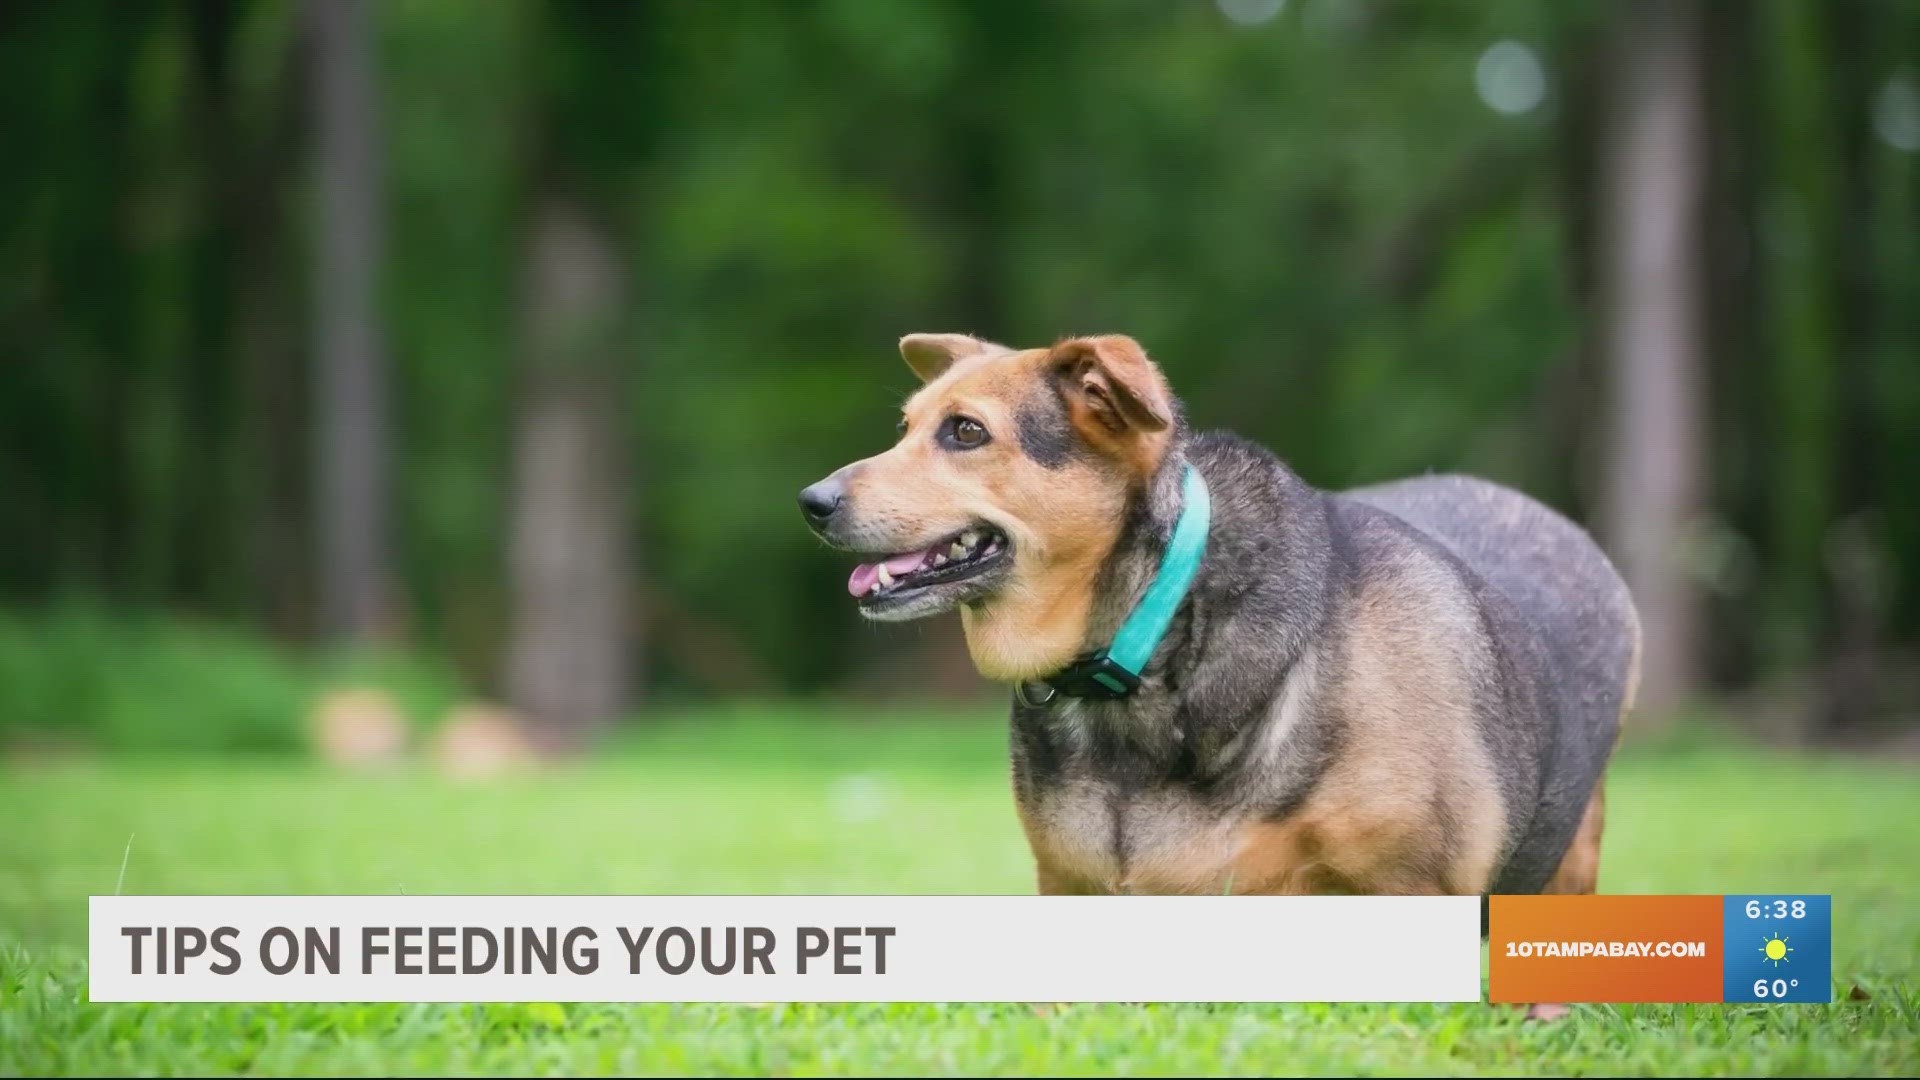 10 Tampa Bay talked to a veterinarian who offered advice on what time to feed your pets, how many times per day and portions.